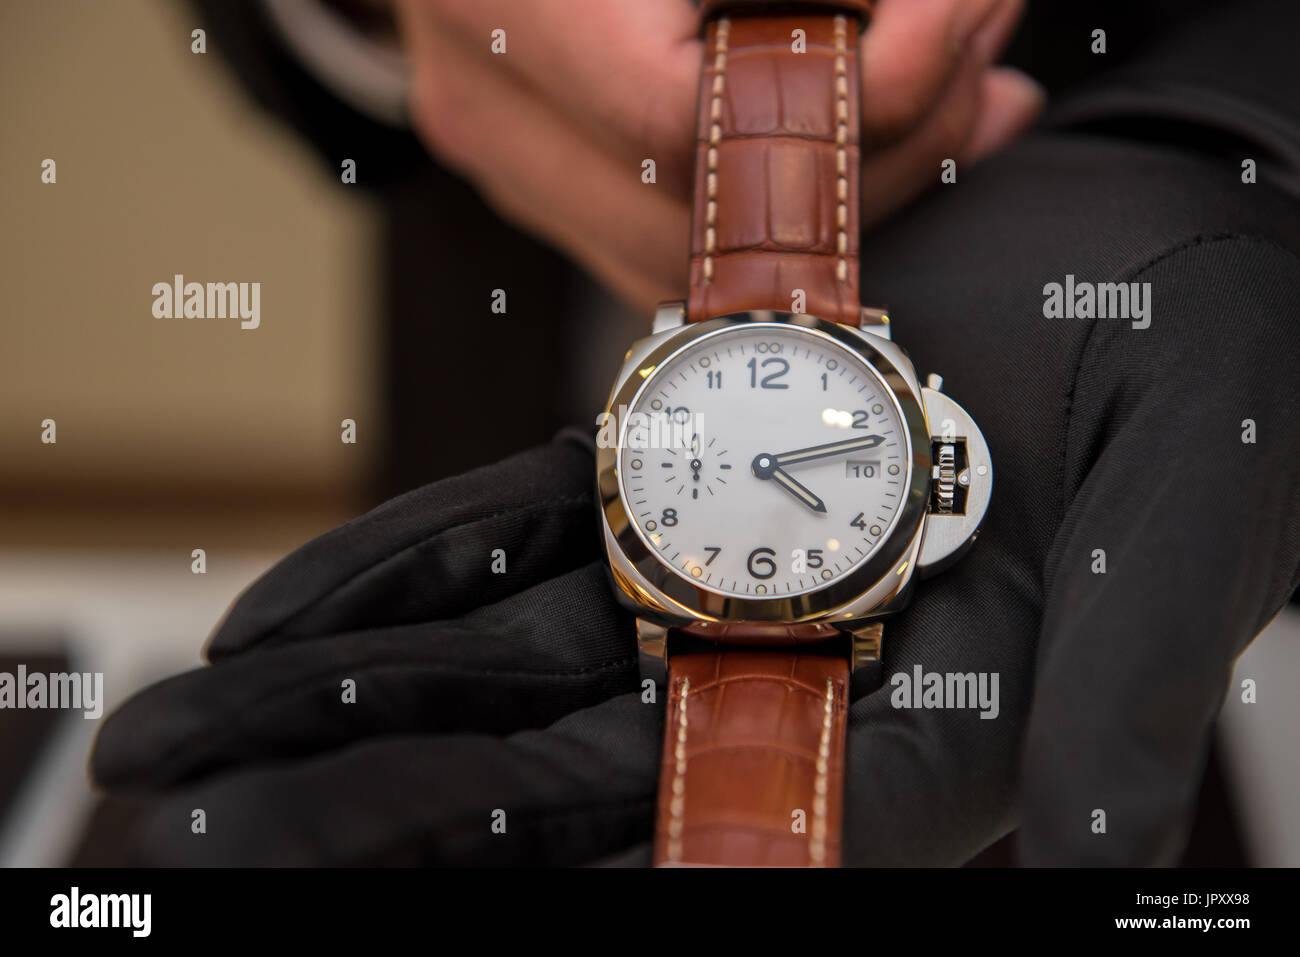 Watchman show watch repair finish for costomer check approved Stock Photo